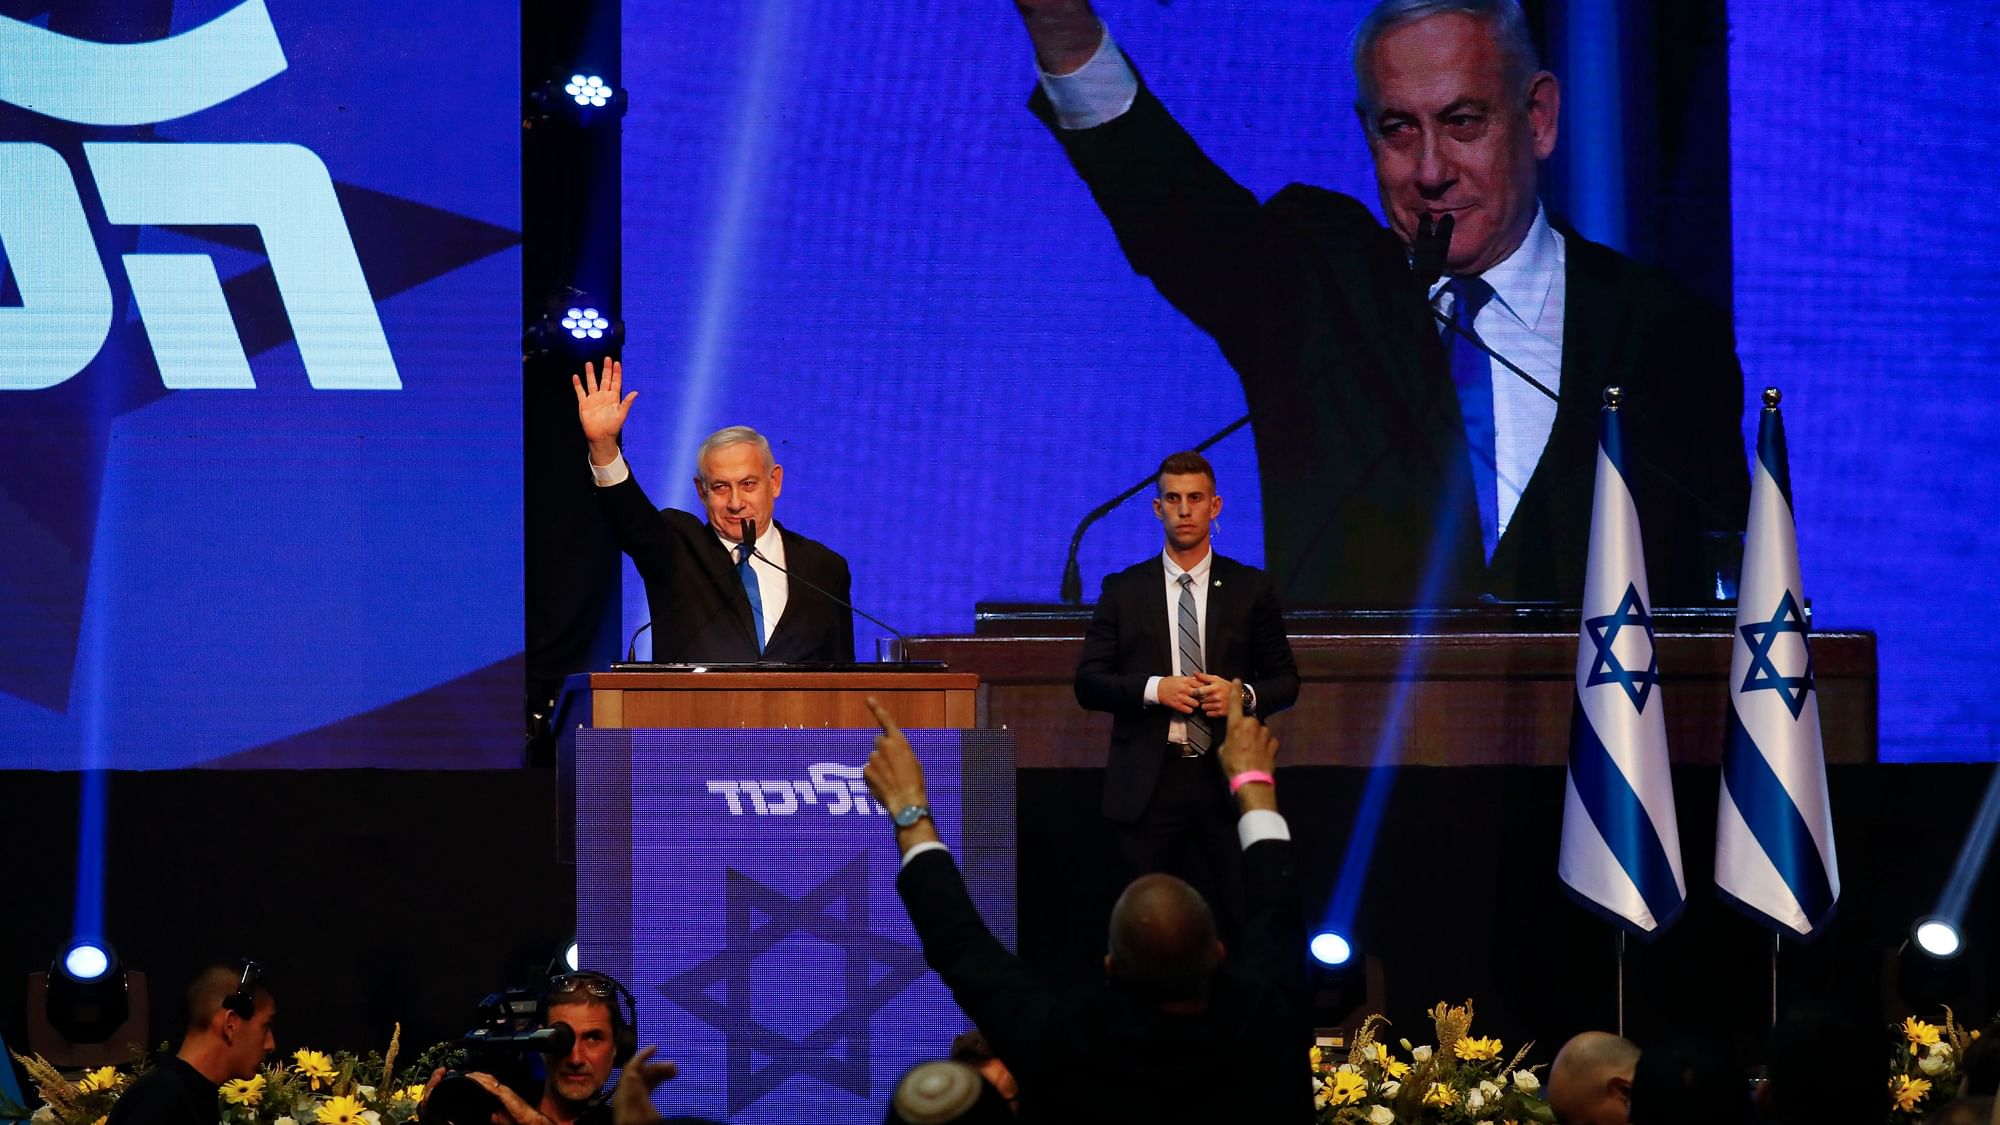 Israeli Prime Minister Benjamin Netanyahu addressees his supporters at party headquarters after elections in Tel Aviv on 18 September.